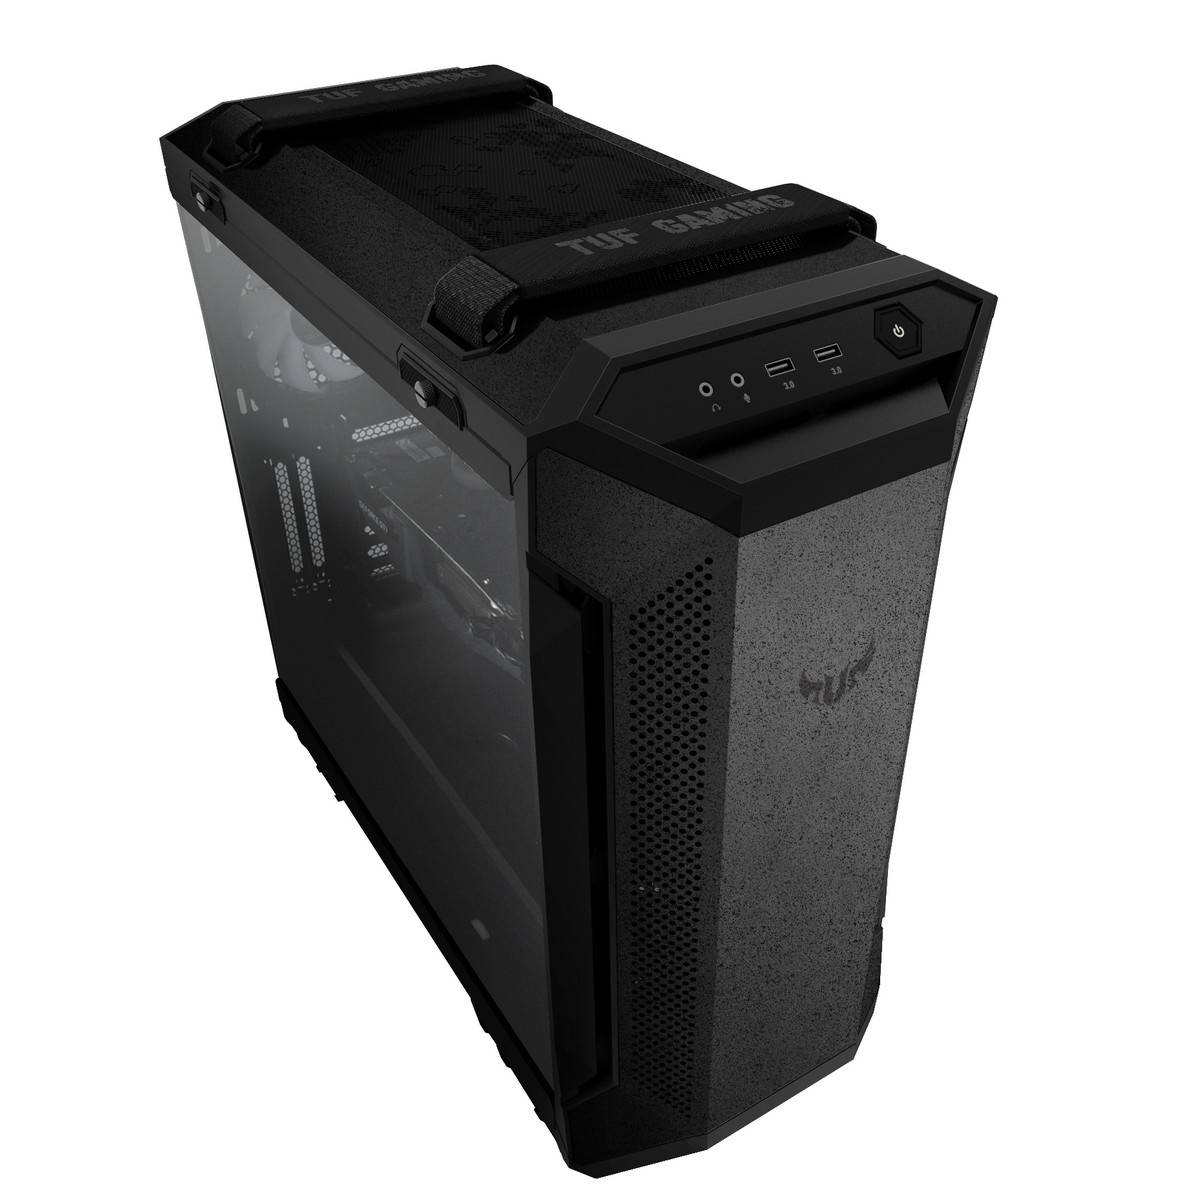 ASUS TUF Gaming GT501 Midi-Tower Case - Black Tempered Glass